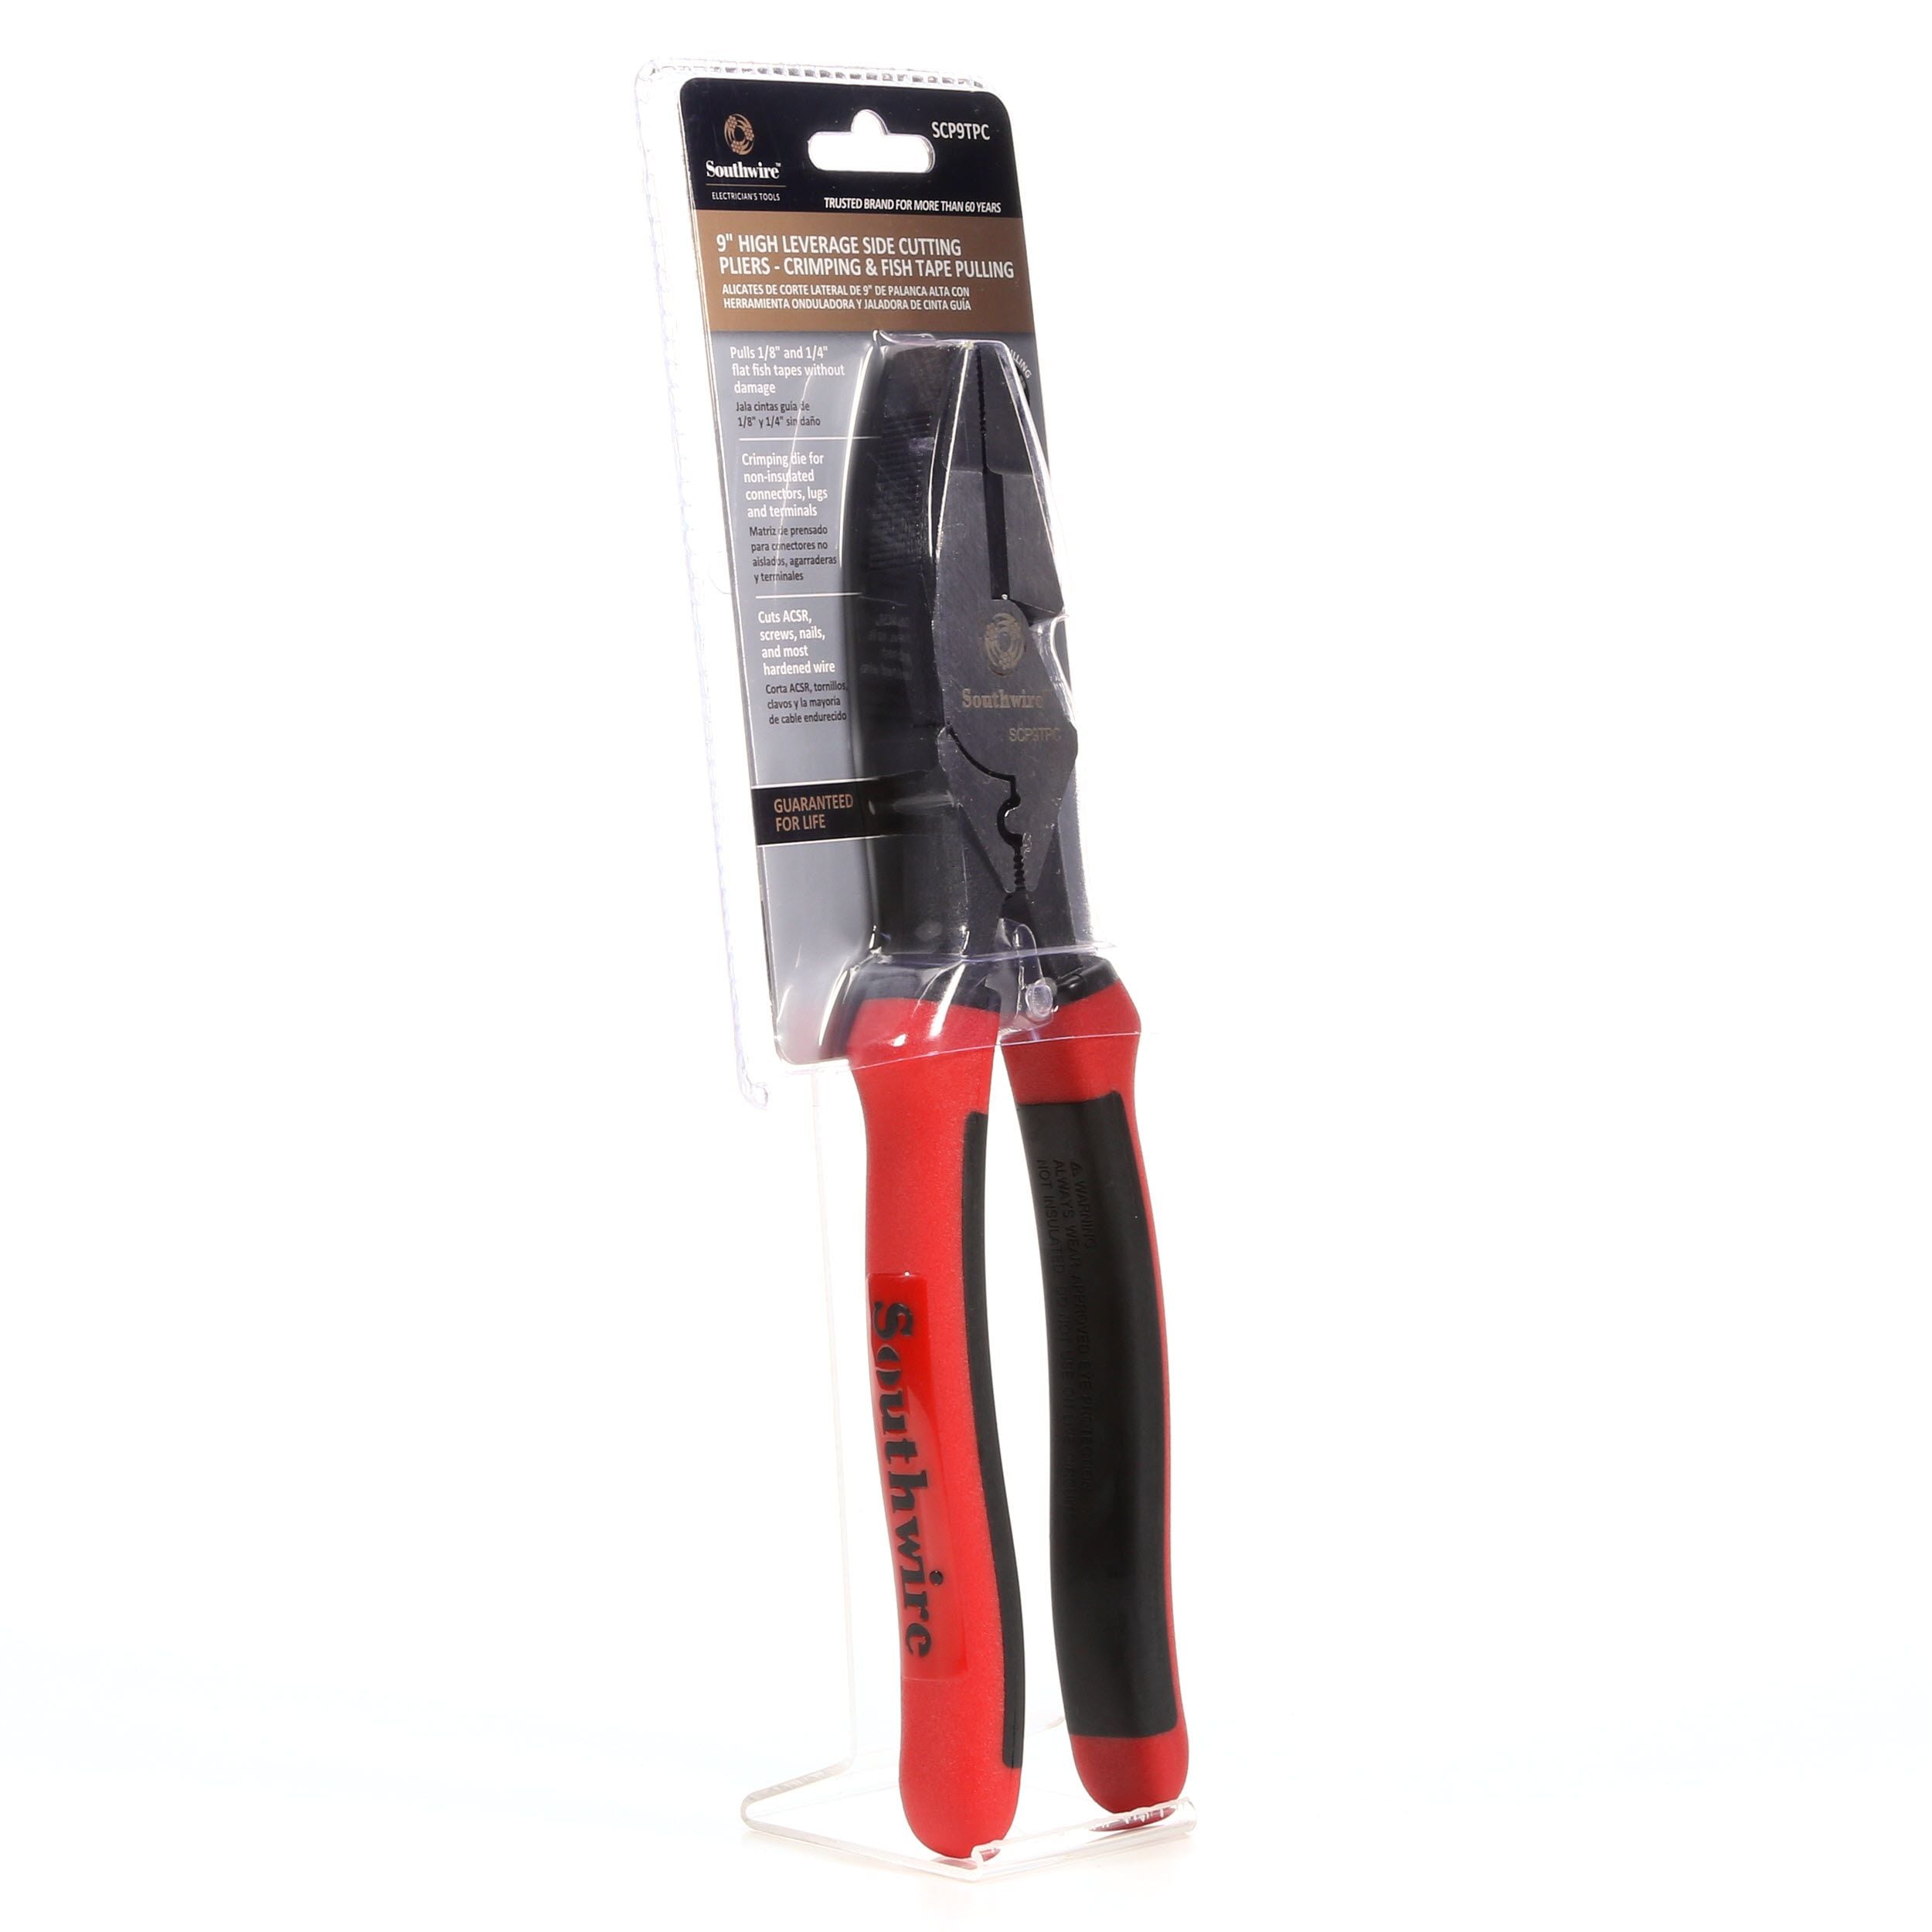 LINEMANS PLIERS 9.5" INCH LONGHIGH LEVERAGE SIDE CUTTING PLYERSSIDECUTTERS 